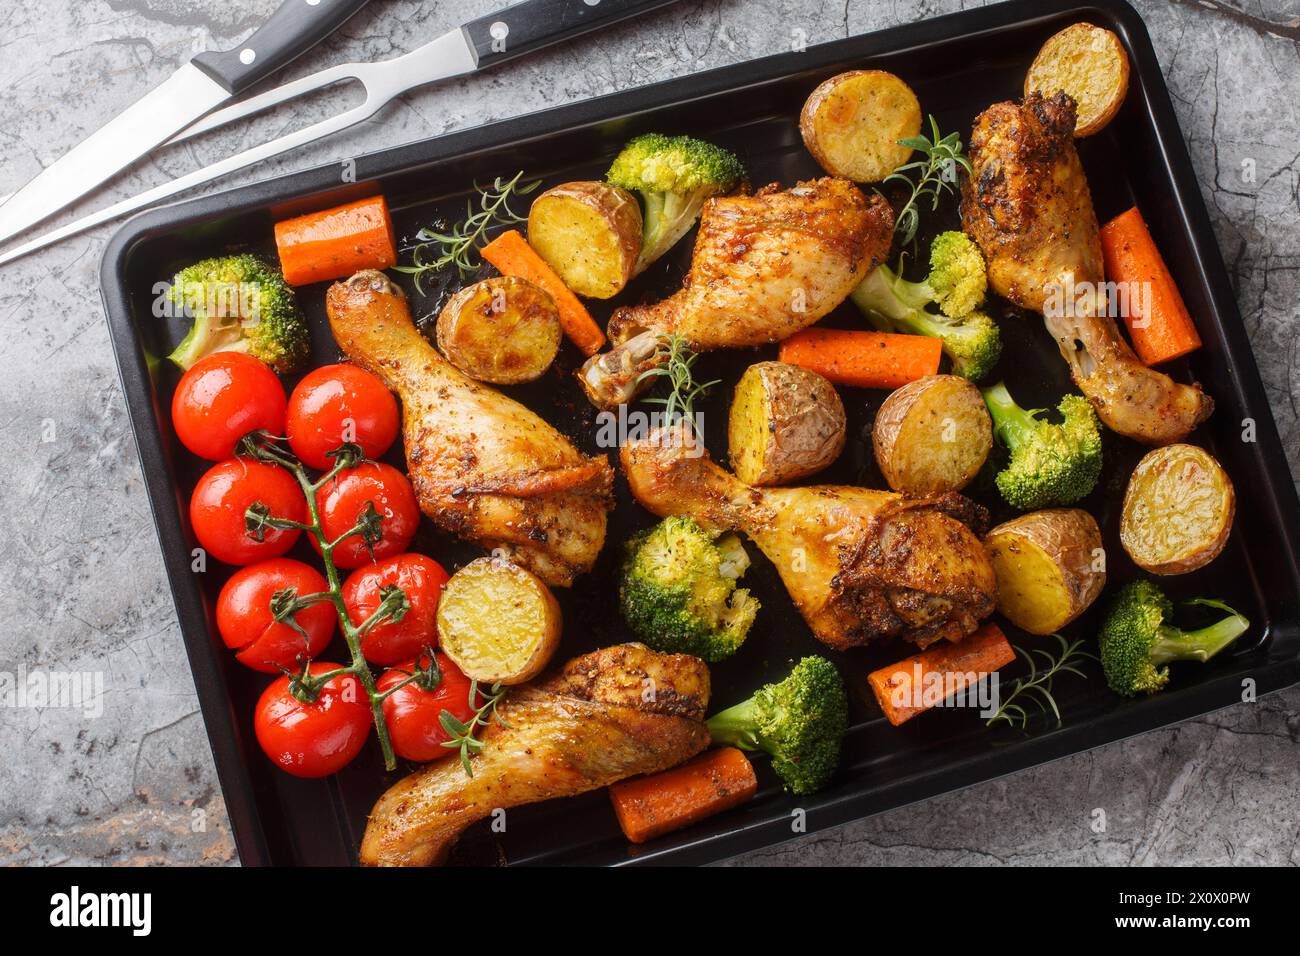 Tasty Baked ruddy chicken legs with potatoes, broccoli, tomato, carrot close-up on a baking sheet on the table. Horizontal top view from above Stock Photo